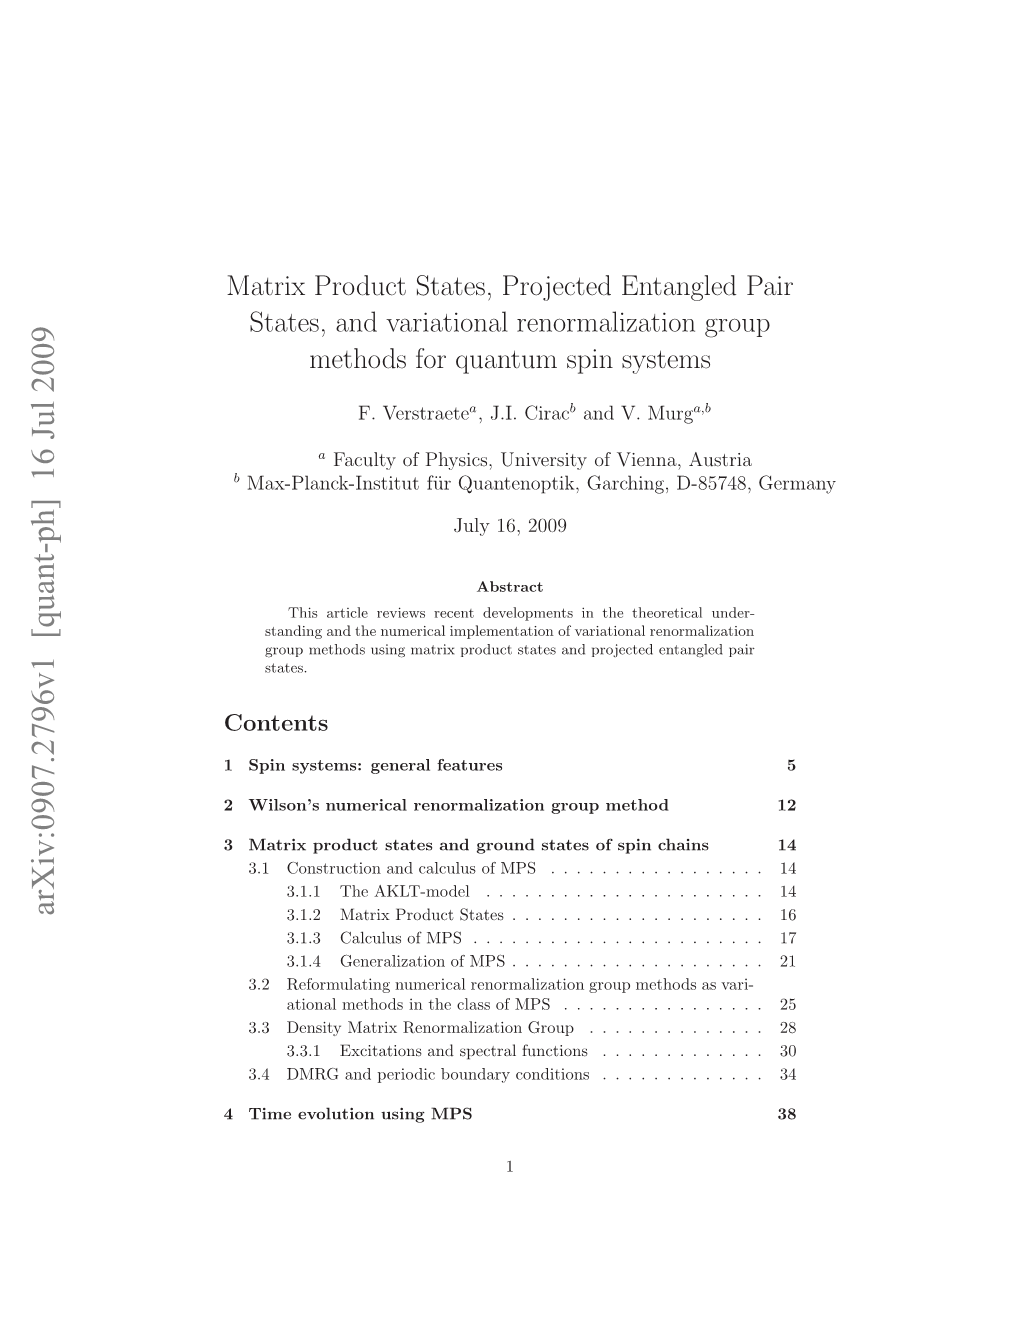 Matrix Product States, Projected Entangled Pair States, And